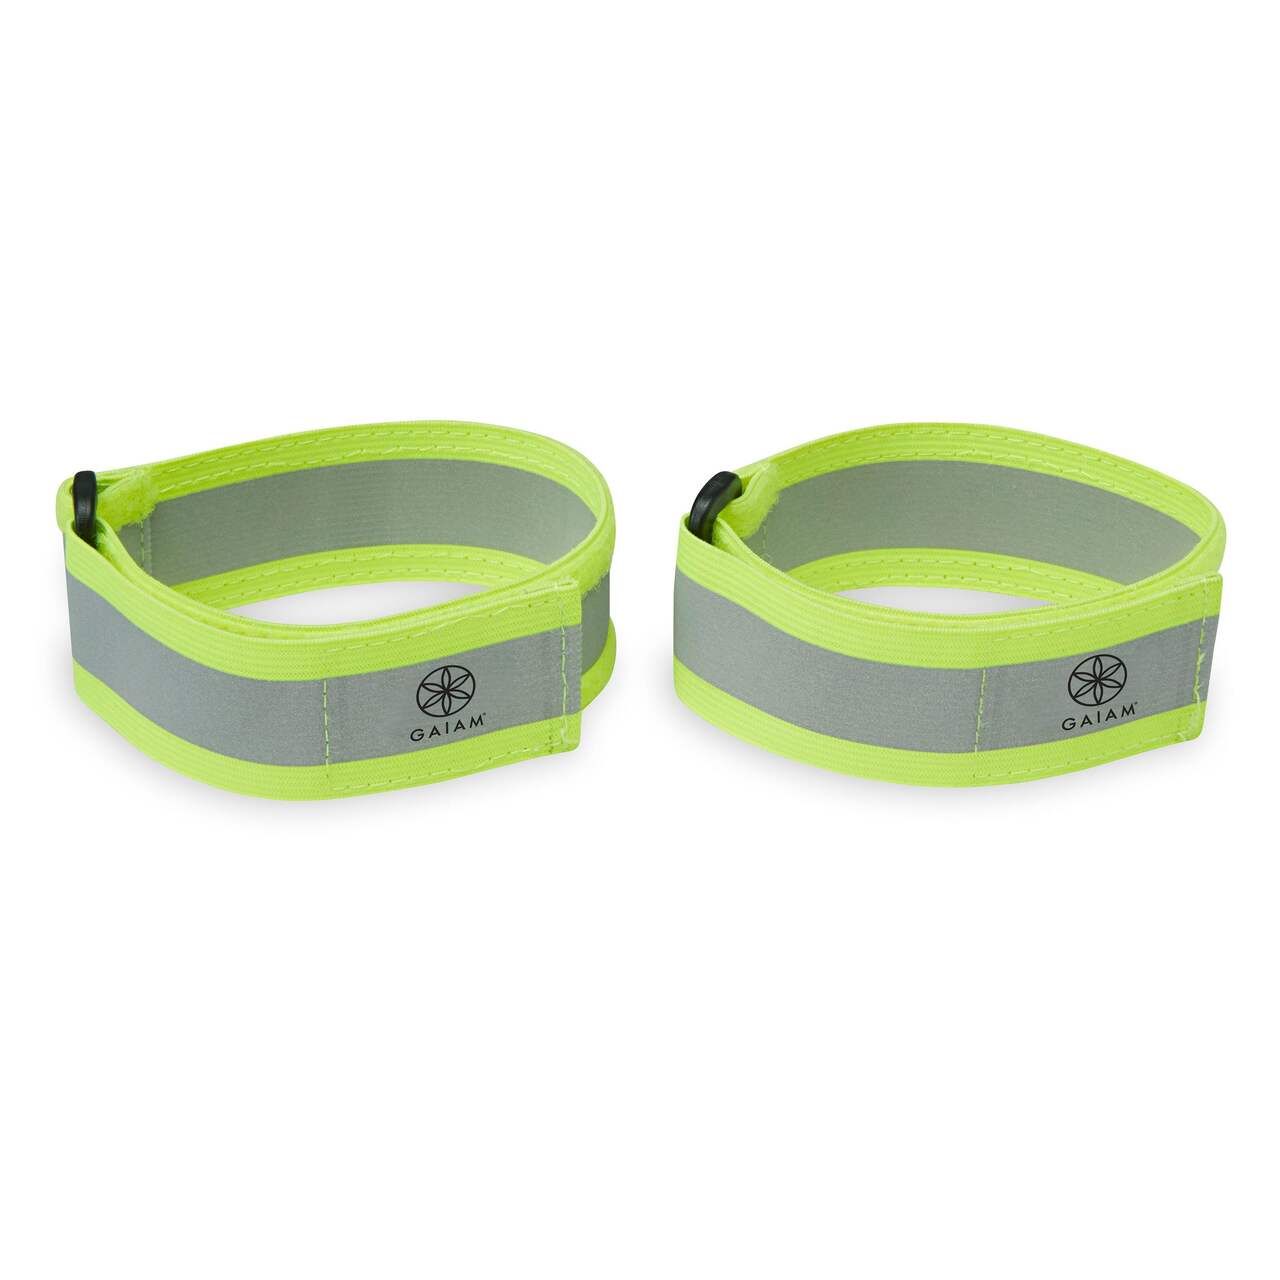 https://media-www.canadiantire.ca/product/playing/exercise/exercise-accessories/1841669/gaiam-reflective-running-bands-2-pack-0494c33c-fc73-4152-bf89-71952b838356-jpgrendition.jpg?imdensity=1&imwidth=640&impolicy=mZoom